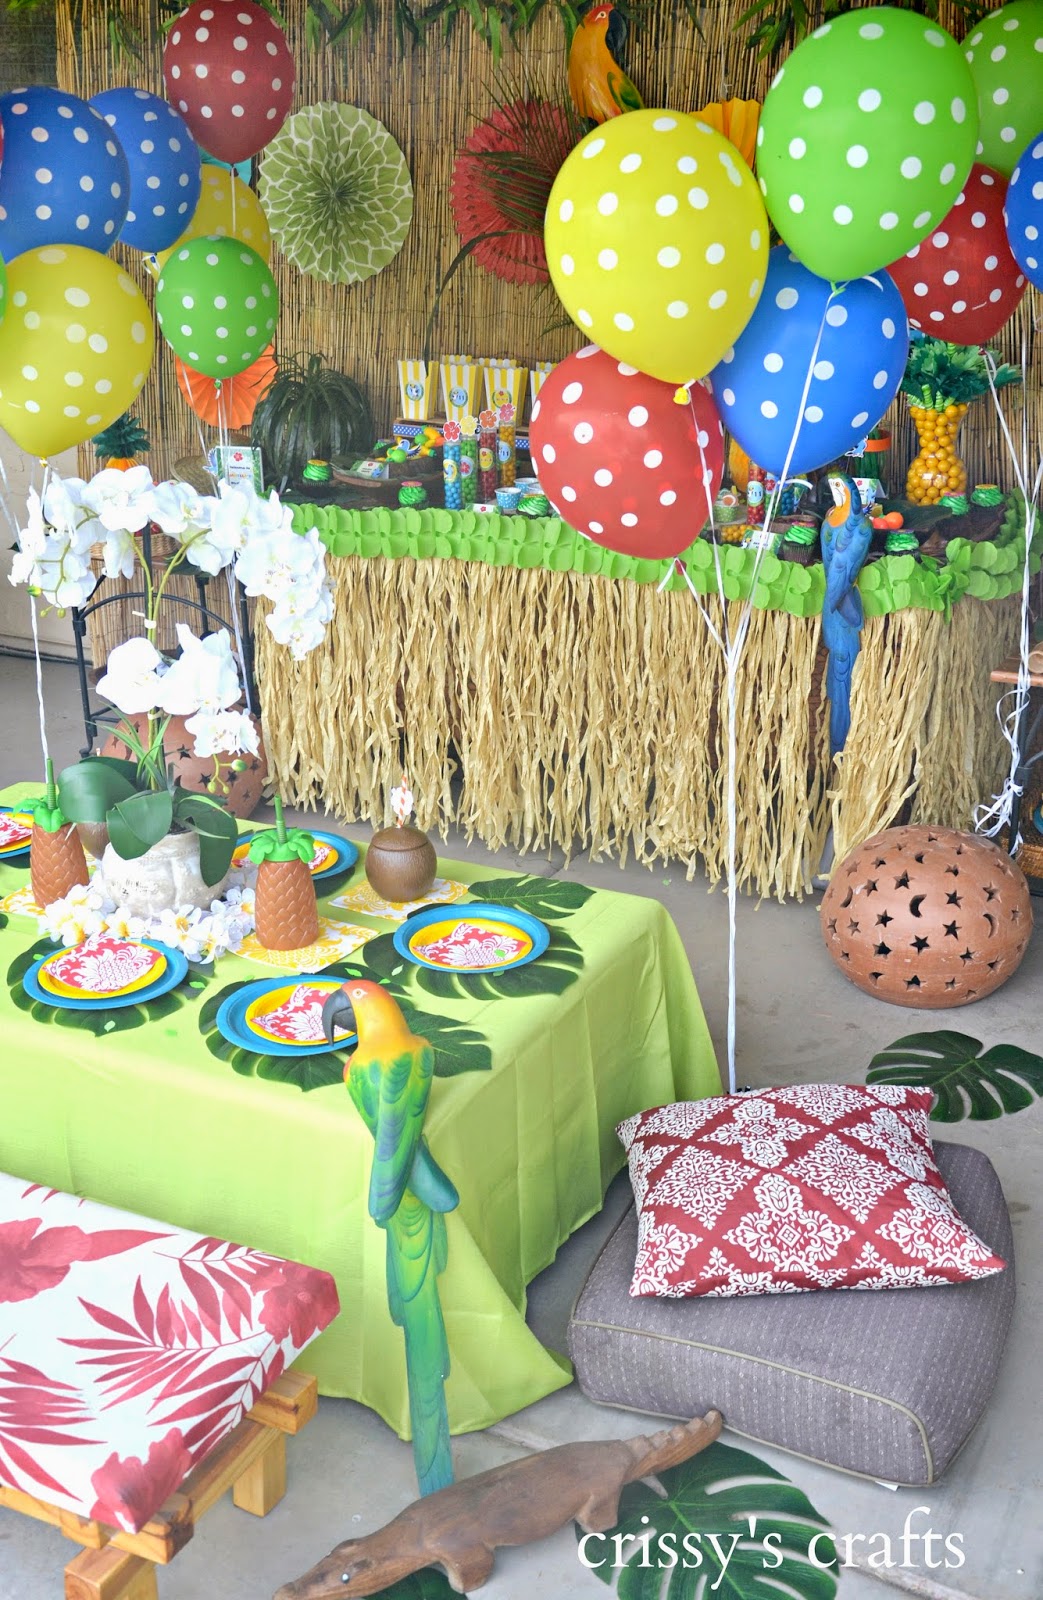 Crissy s Crafts Rio 2 Inspired Party  It s on in the Amazon  